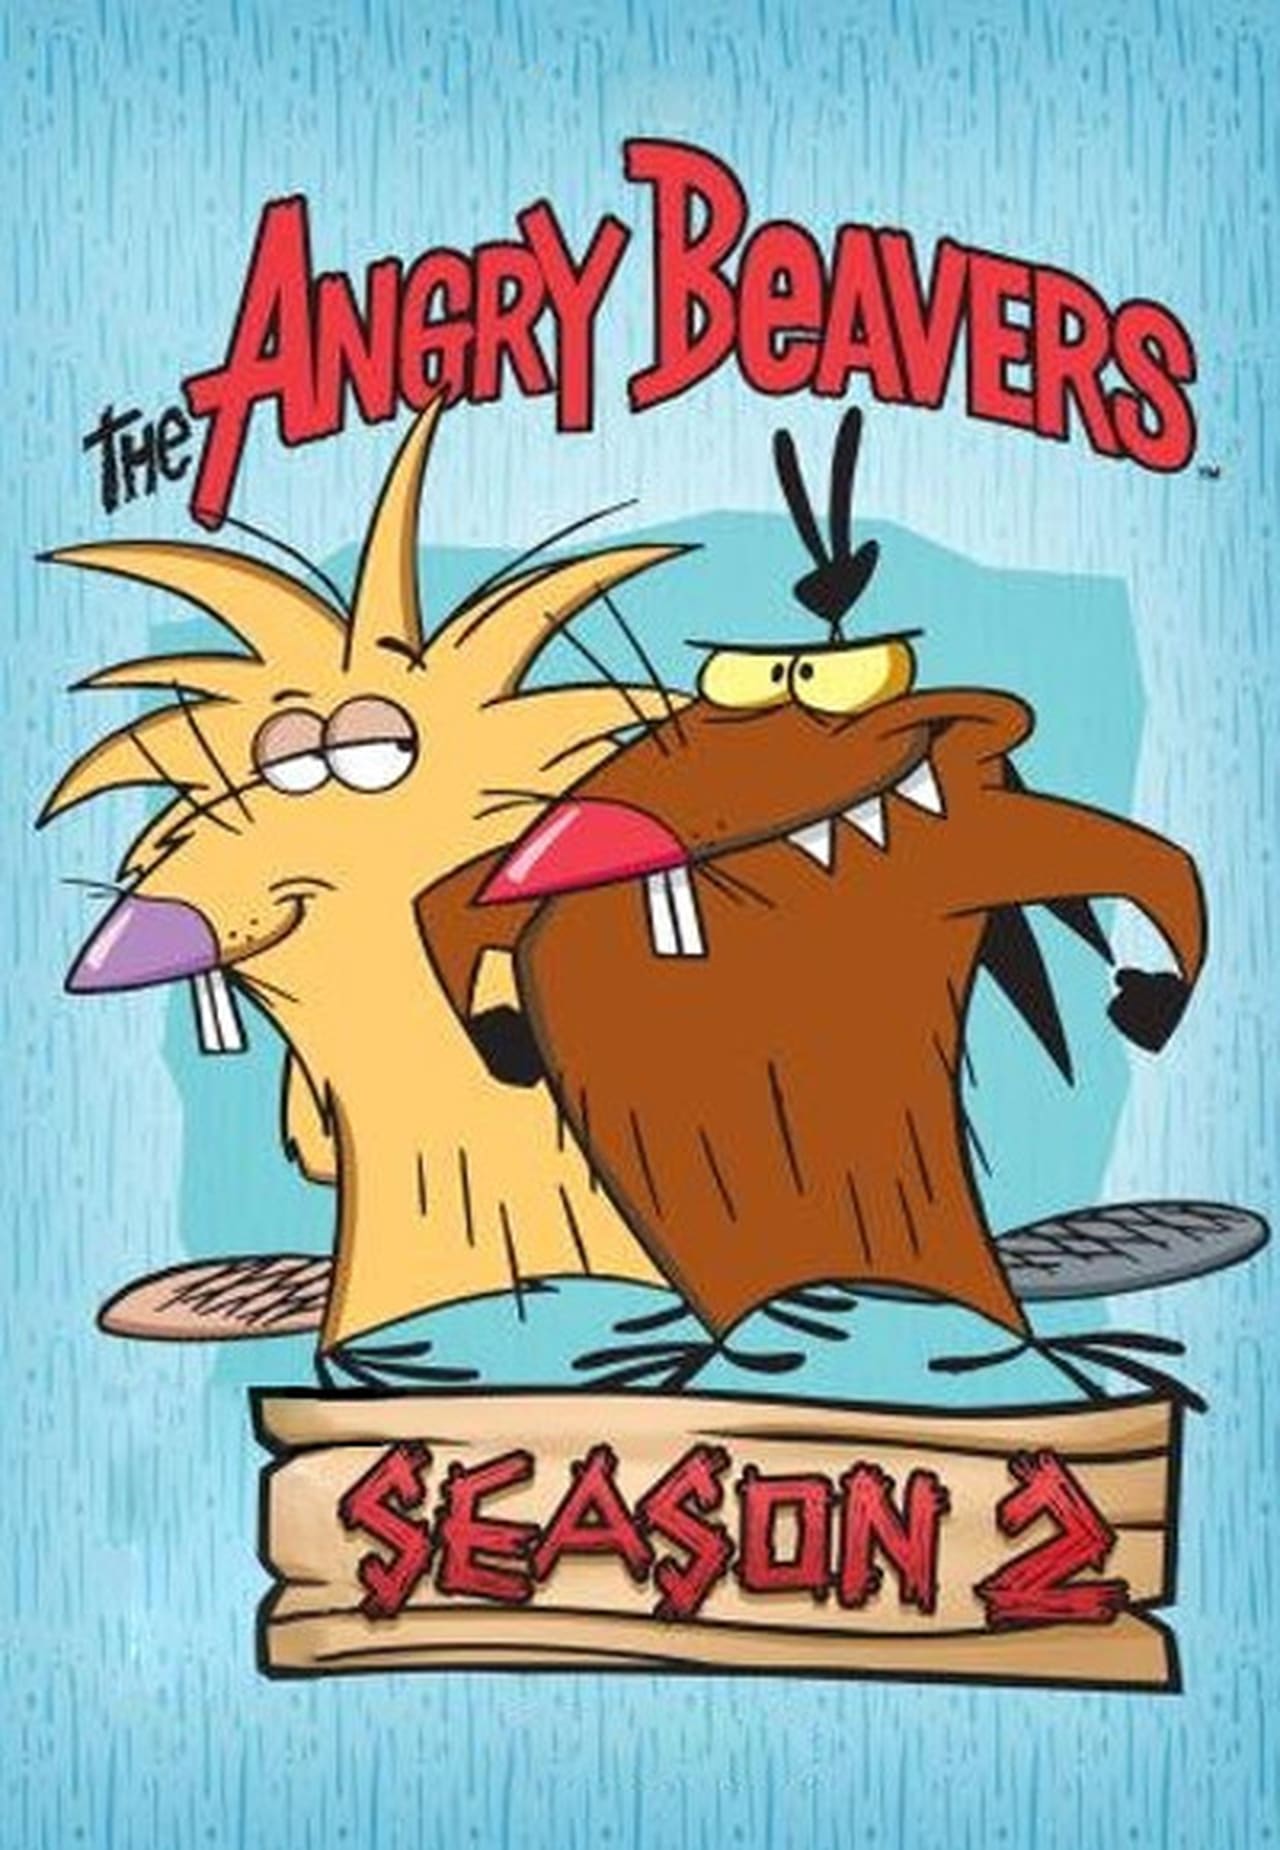 The Angry Beavers (1998)